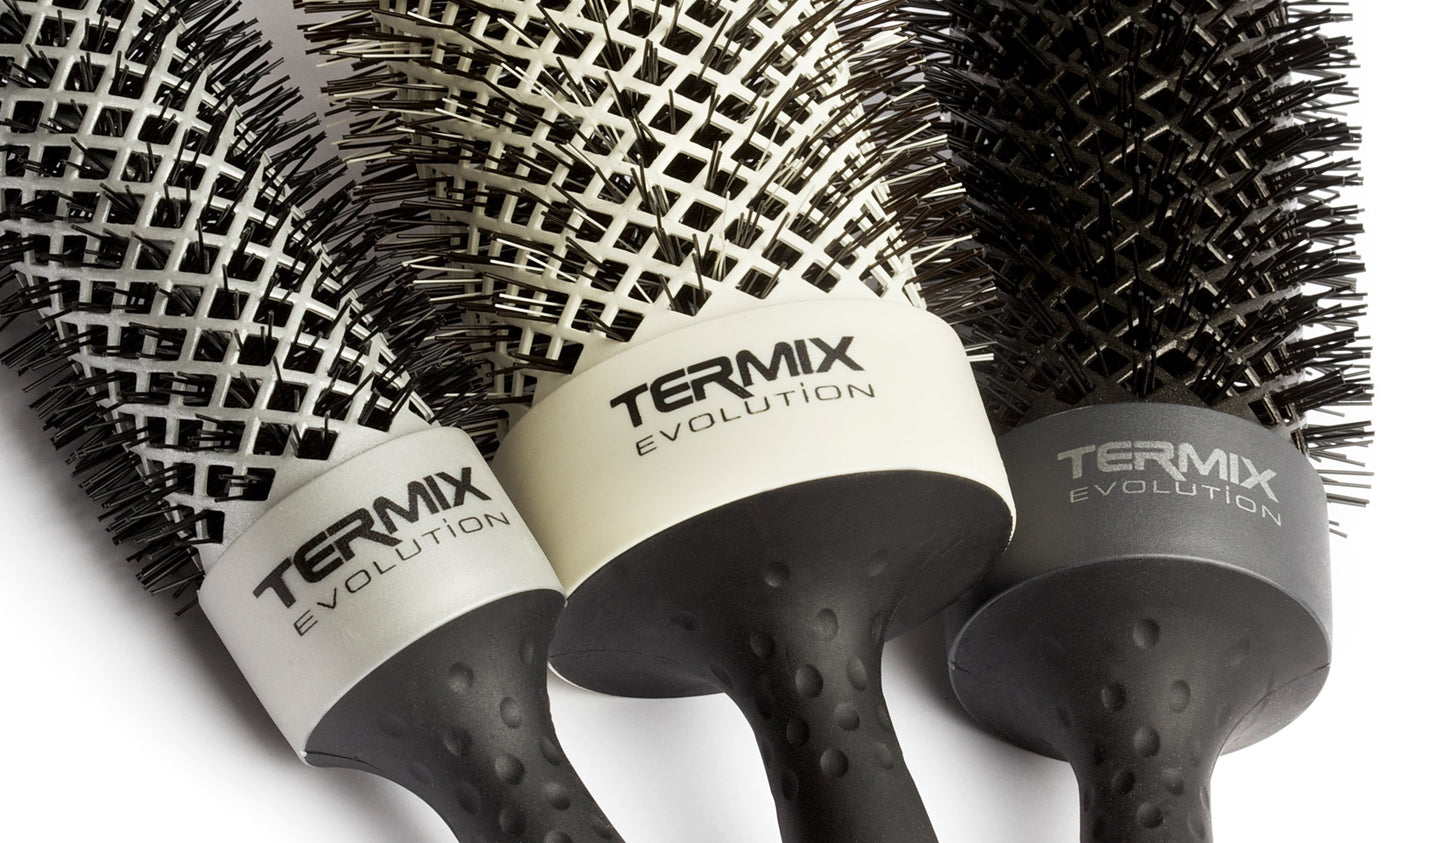 *Termix Evolution Styling Brush 12mm PLUS for Thick Hair